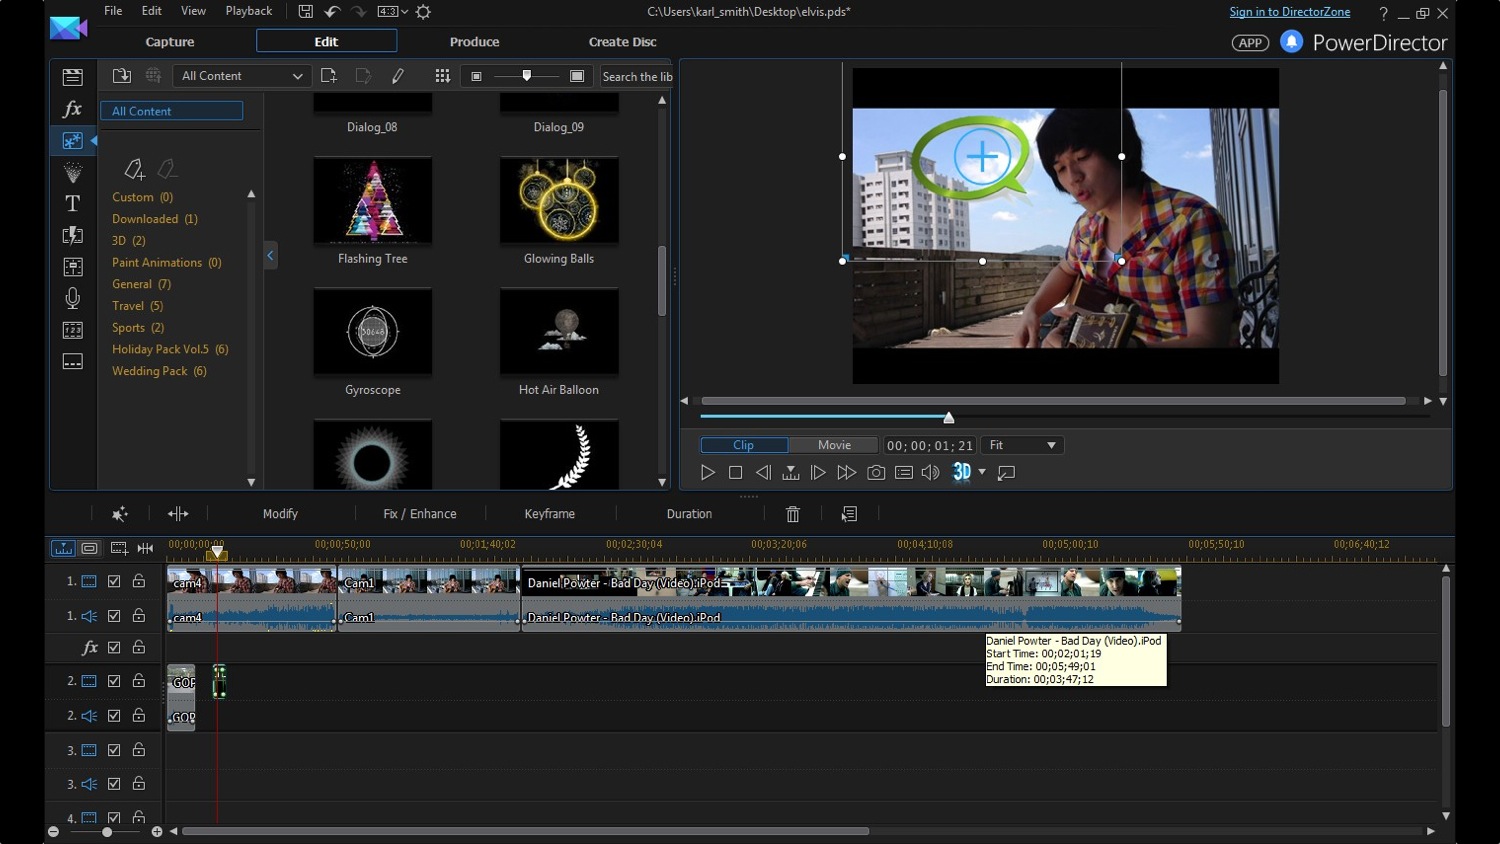 cyberlink director suite 4s new features include action cam video editing pip designer enu